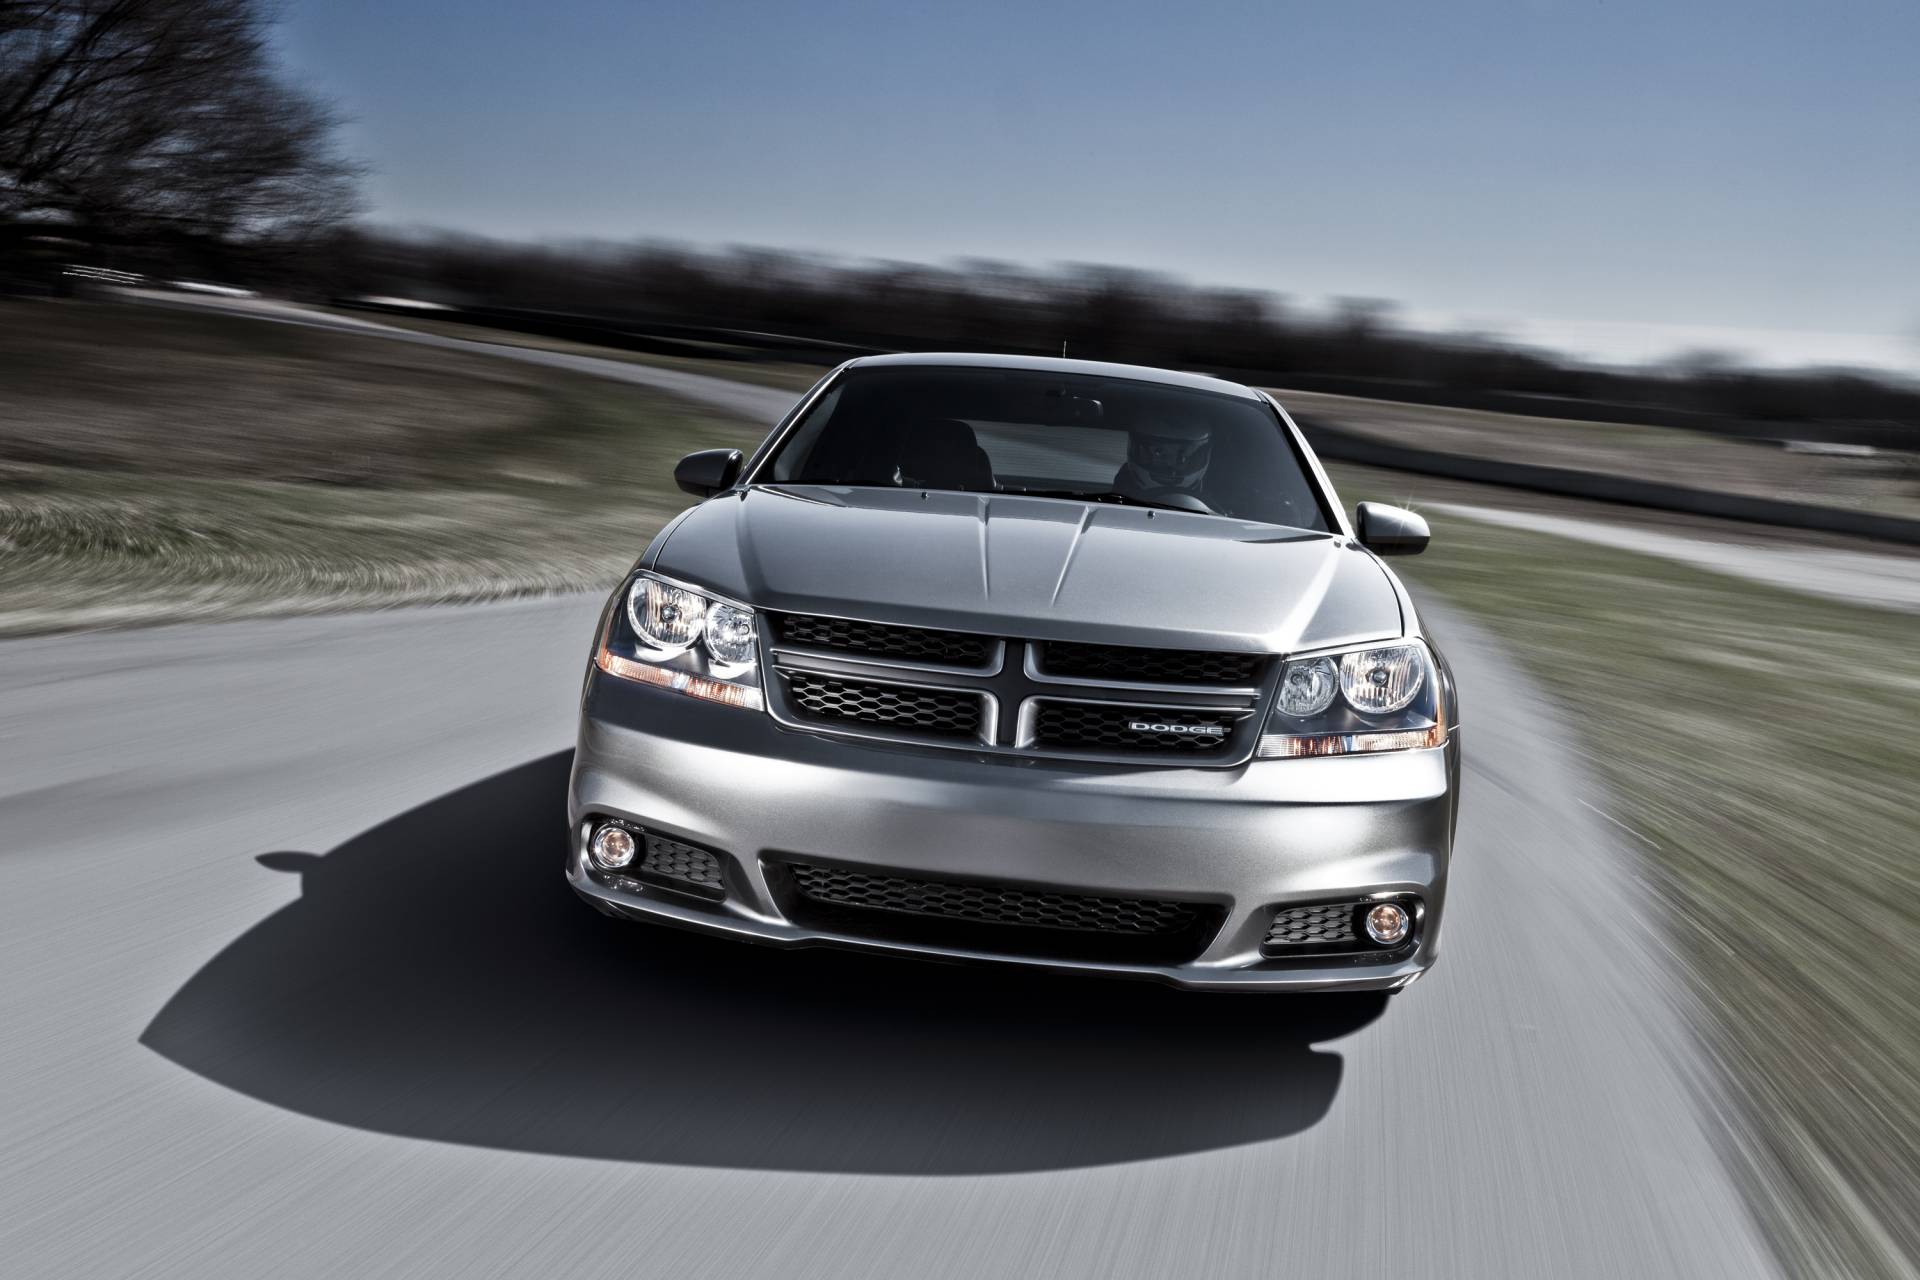 Dodge Avenger Wallpaper And Image Gallery